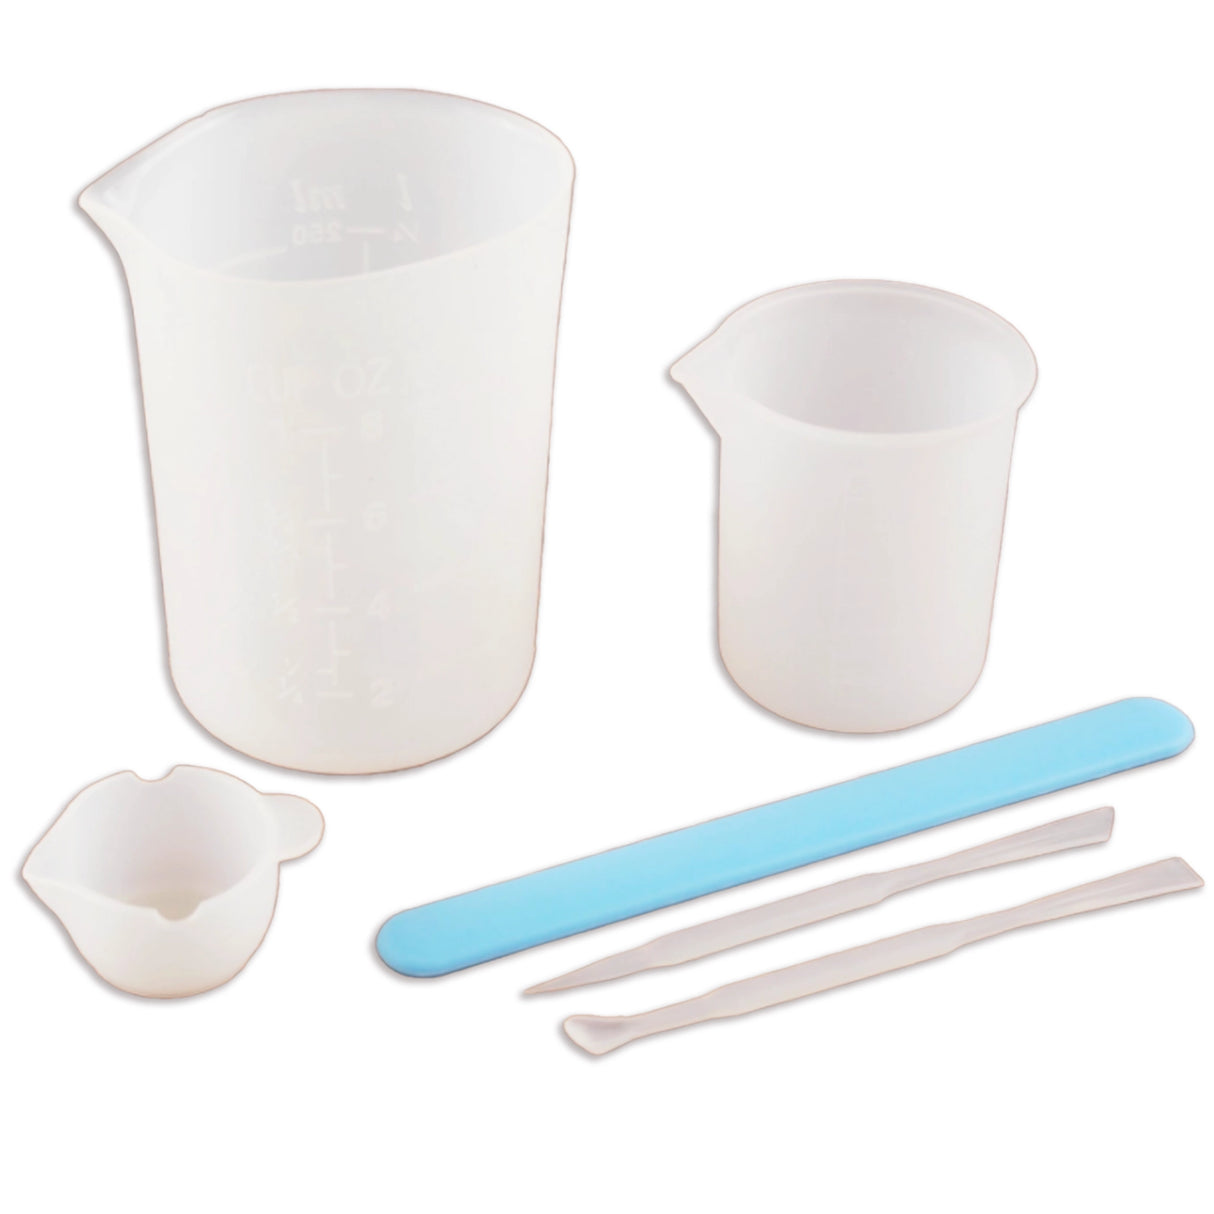 Silicone Tools - Mixing Set